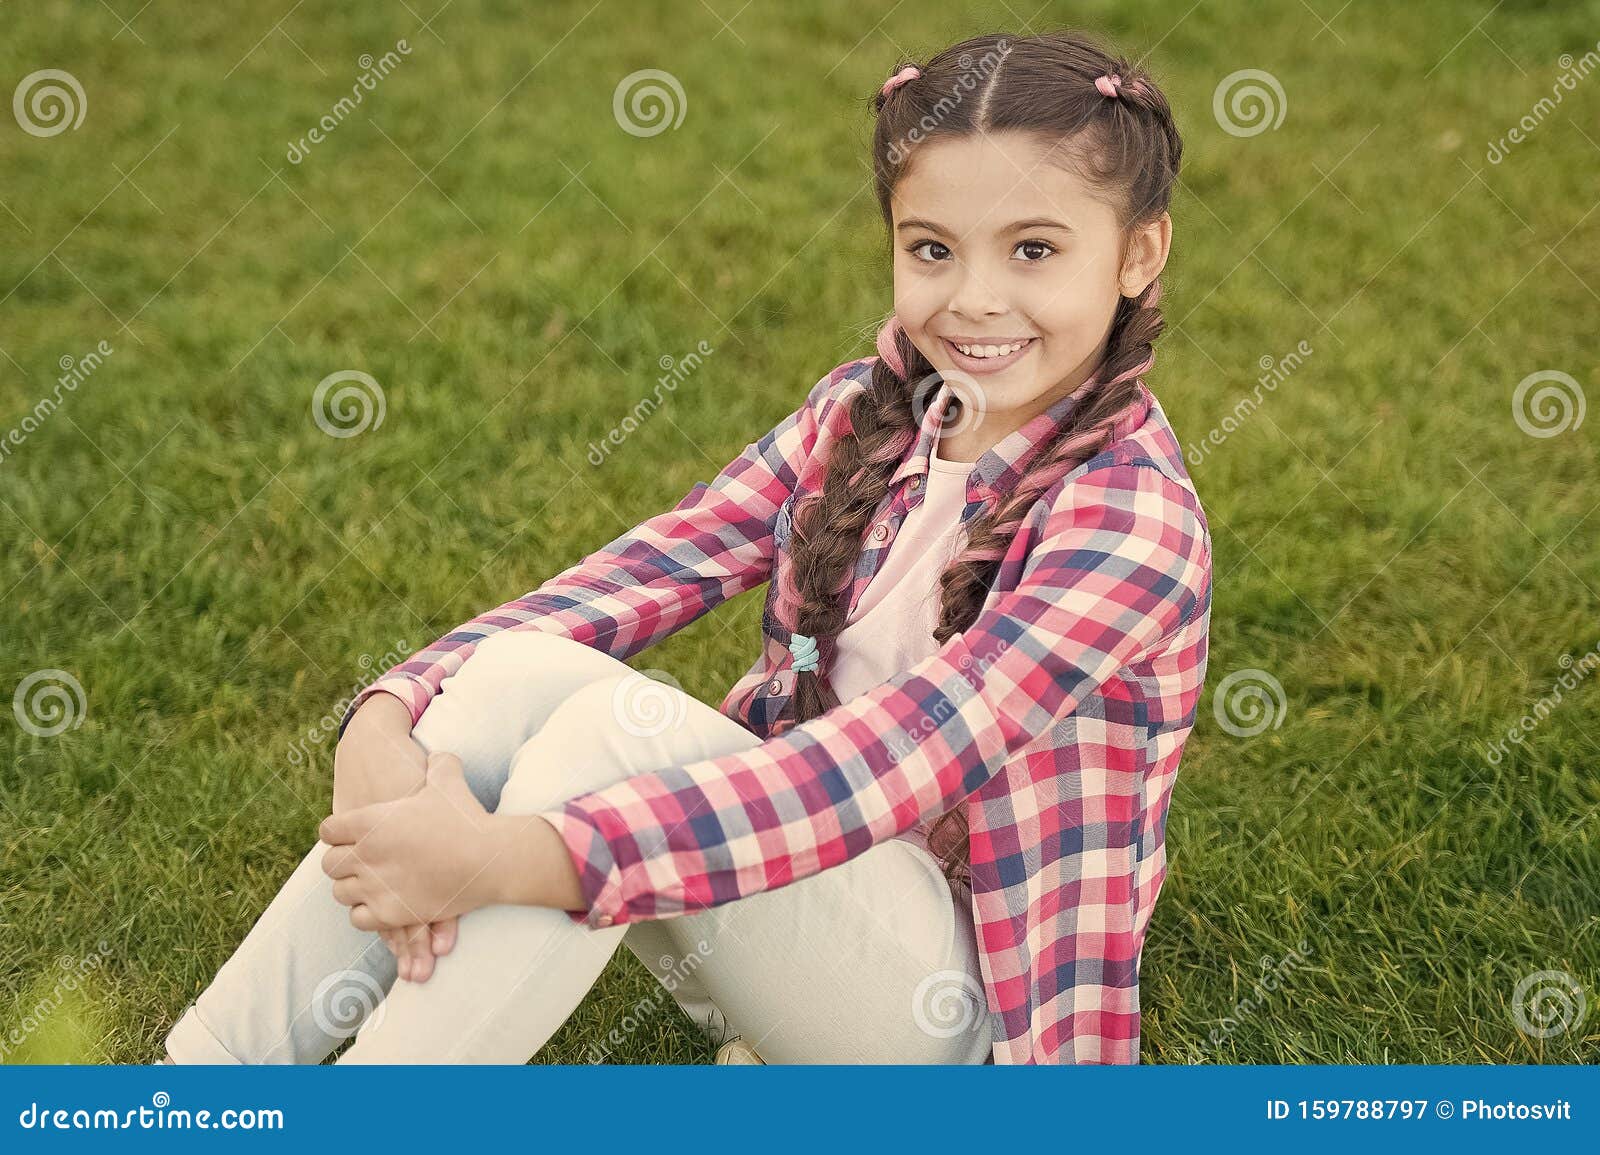 Summer Vibes. Small Girl Relax on Green Grass. Parks and Outdoor. Spring  Nature. Summer Picnic Stock Image - Image of dream, green: 159788797